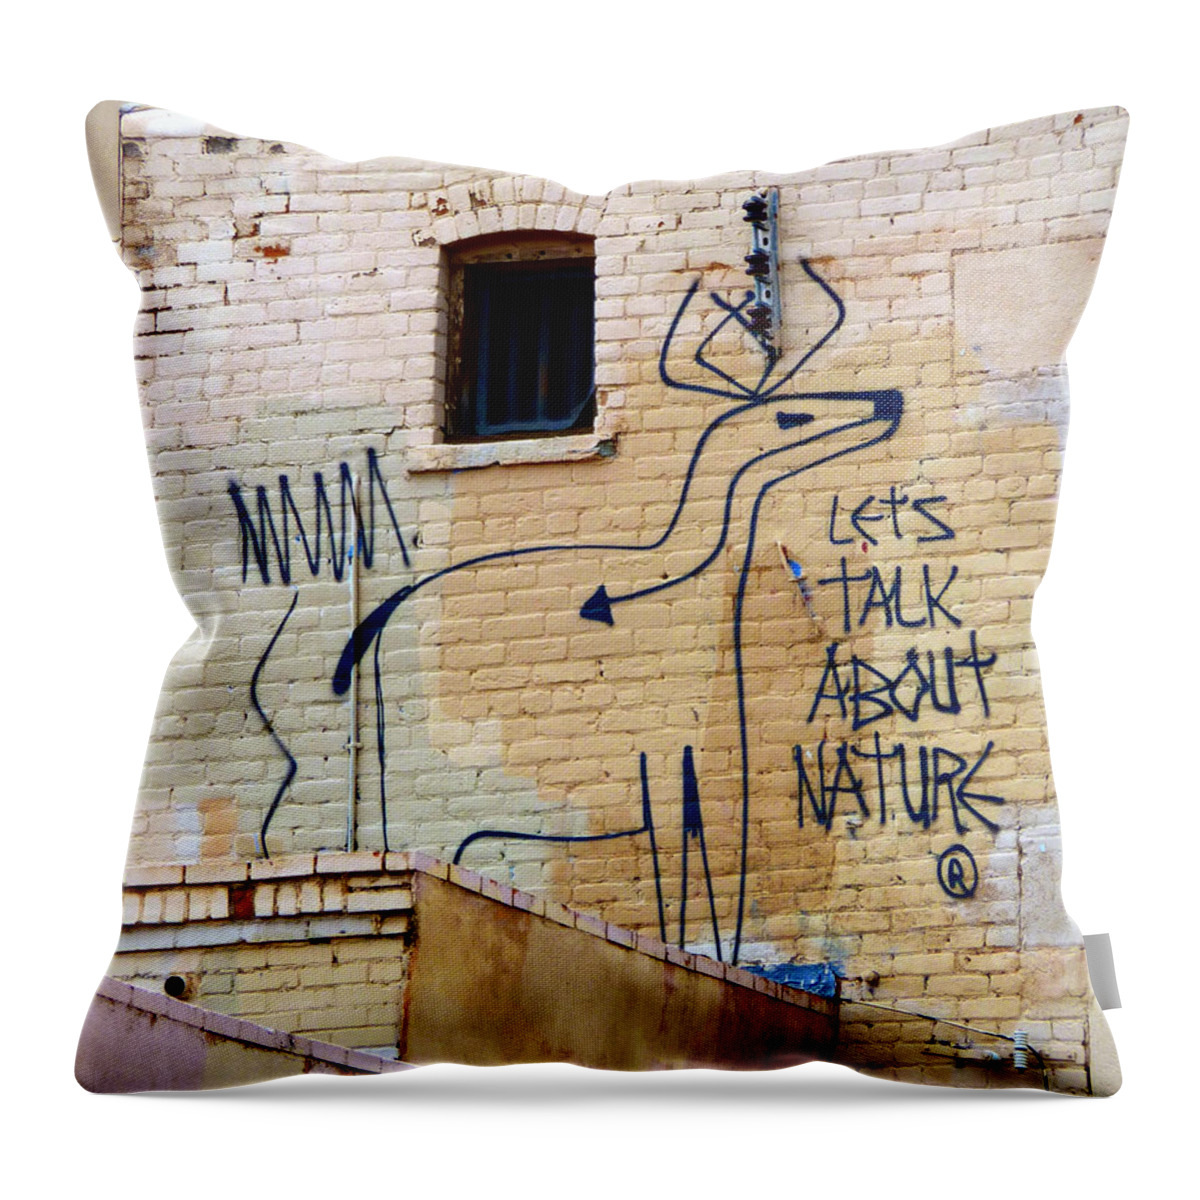 Let's Talk About Nature Throw Pillow featuring the photograph Let's Talk About Nature by Gia Marie Houck